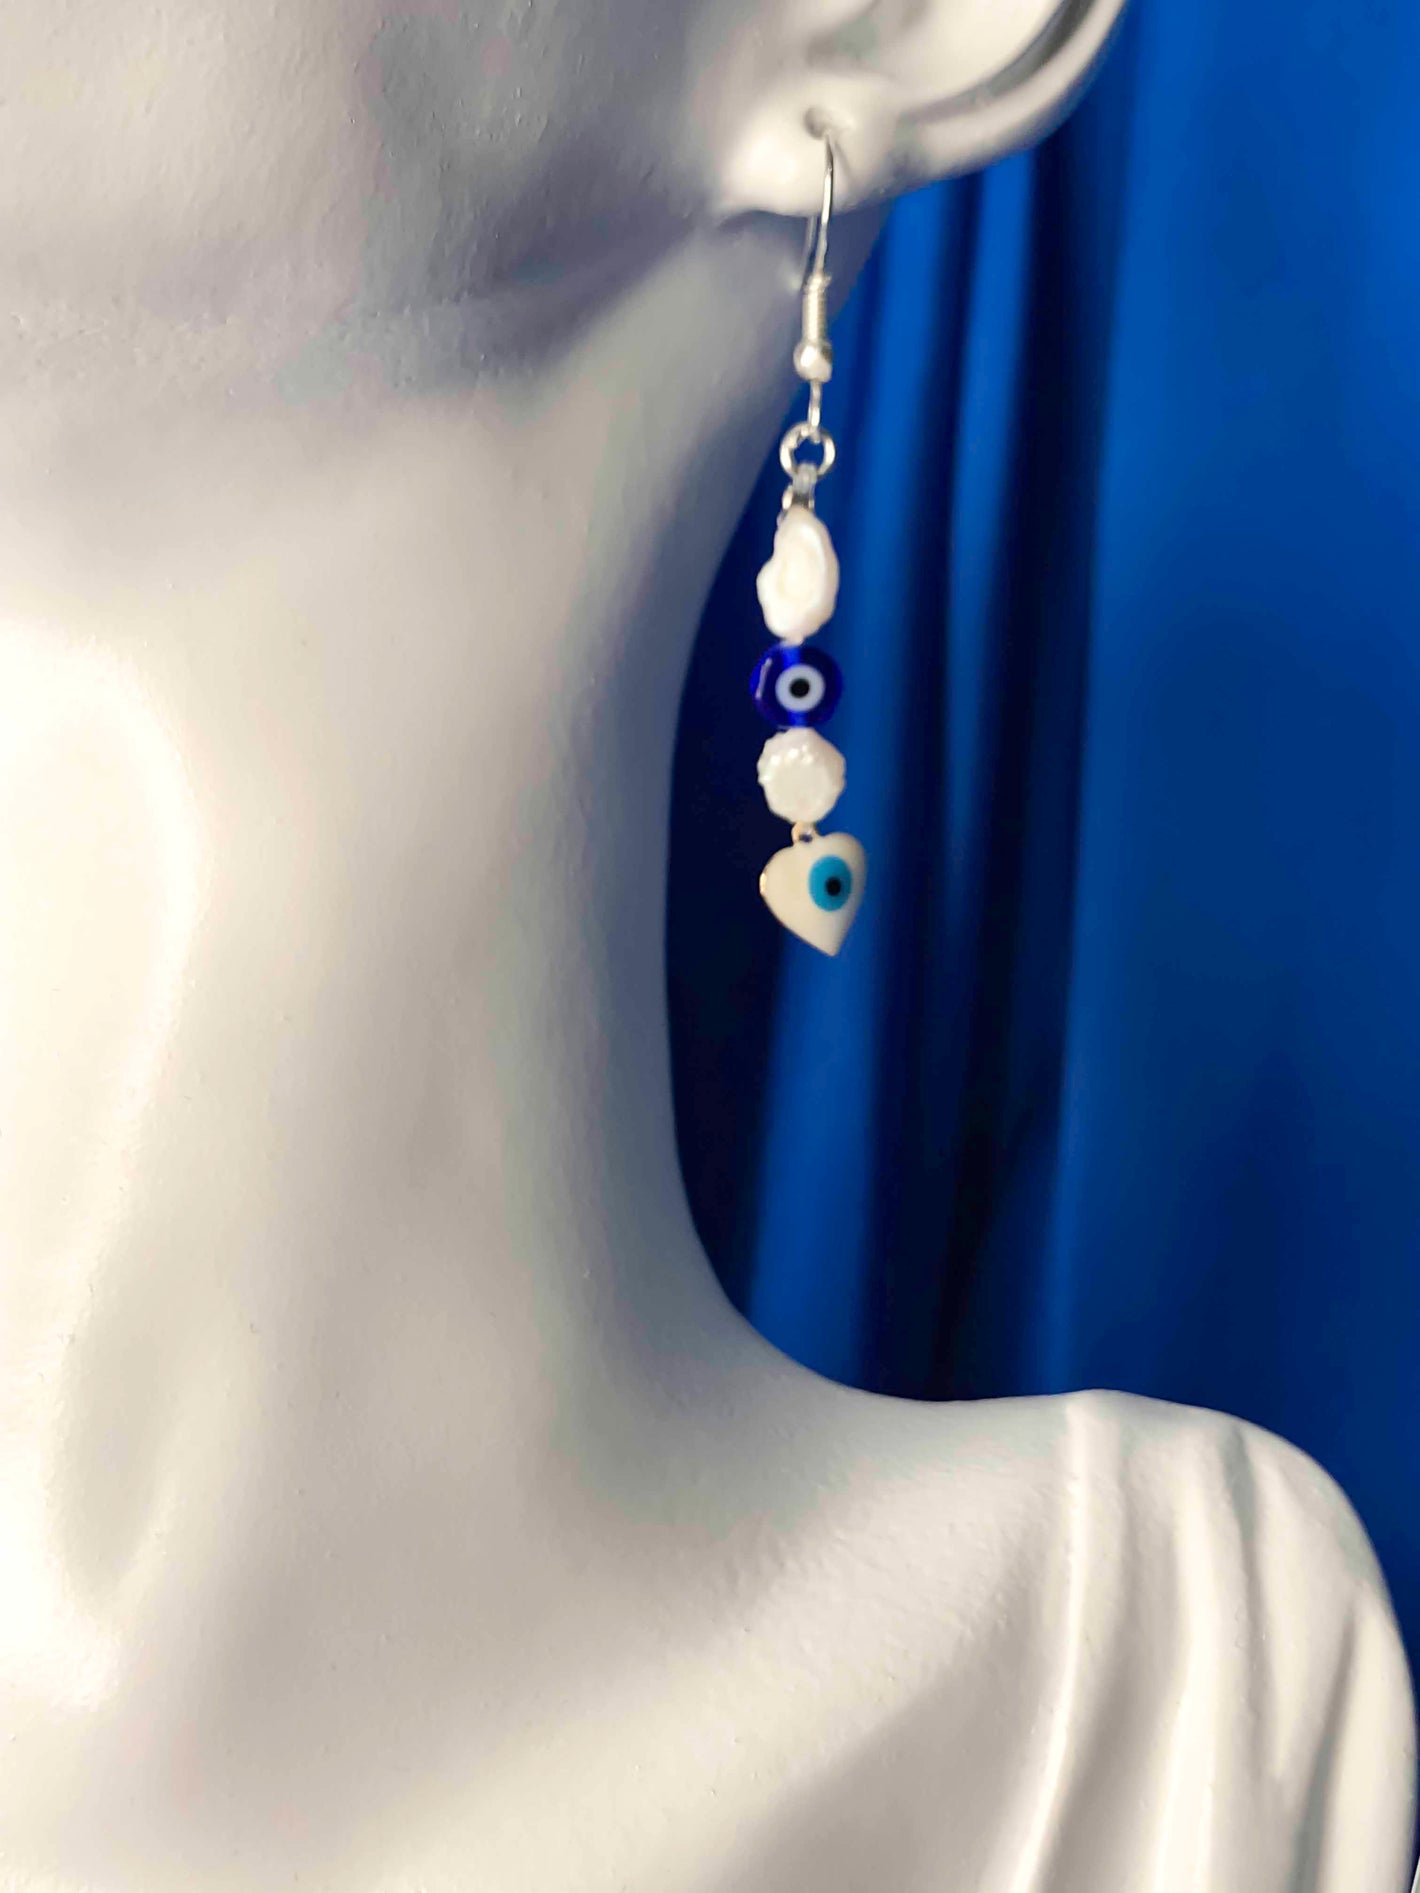 These drop earrings make a bold statement. Using the white evil eye for purity and focus, as well as the blue evil eye for karma and fate protection.